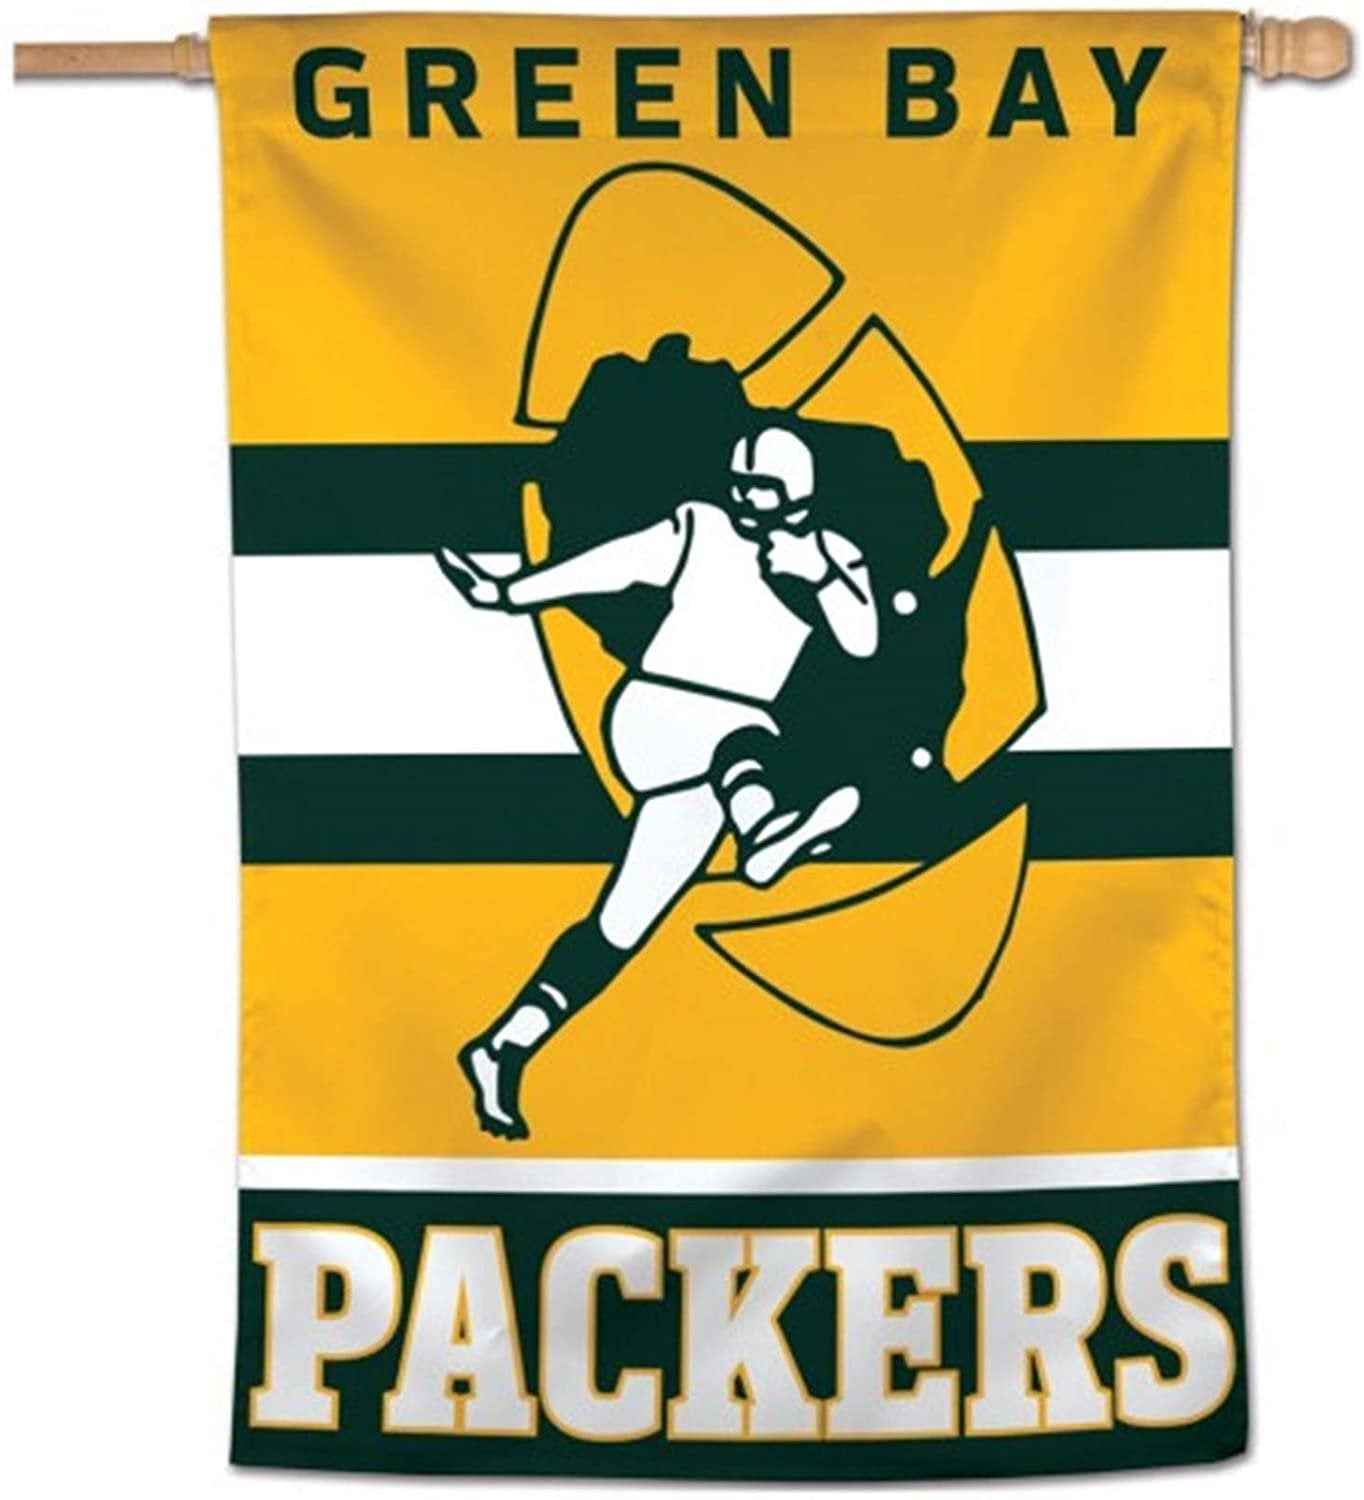 Green Bay Packers Premium 28x44 Inch House Flag Banner, Retro Logo, Outdoor Indoor Use